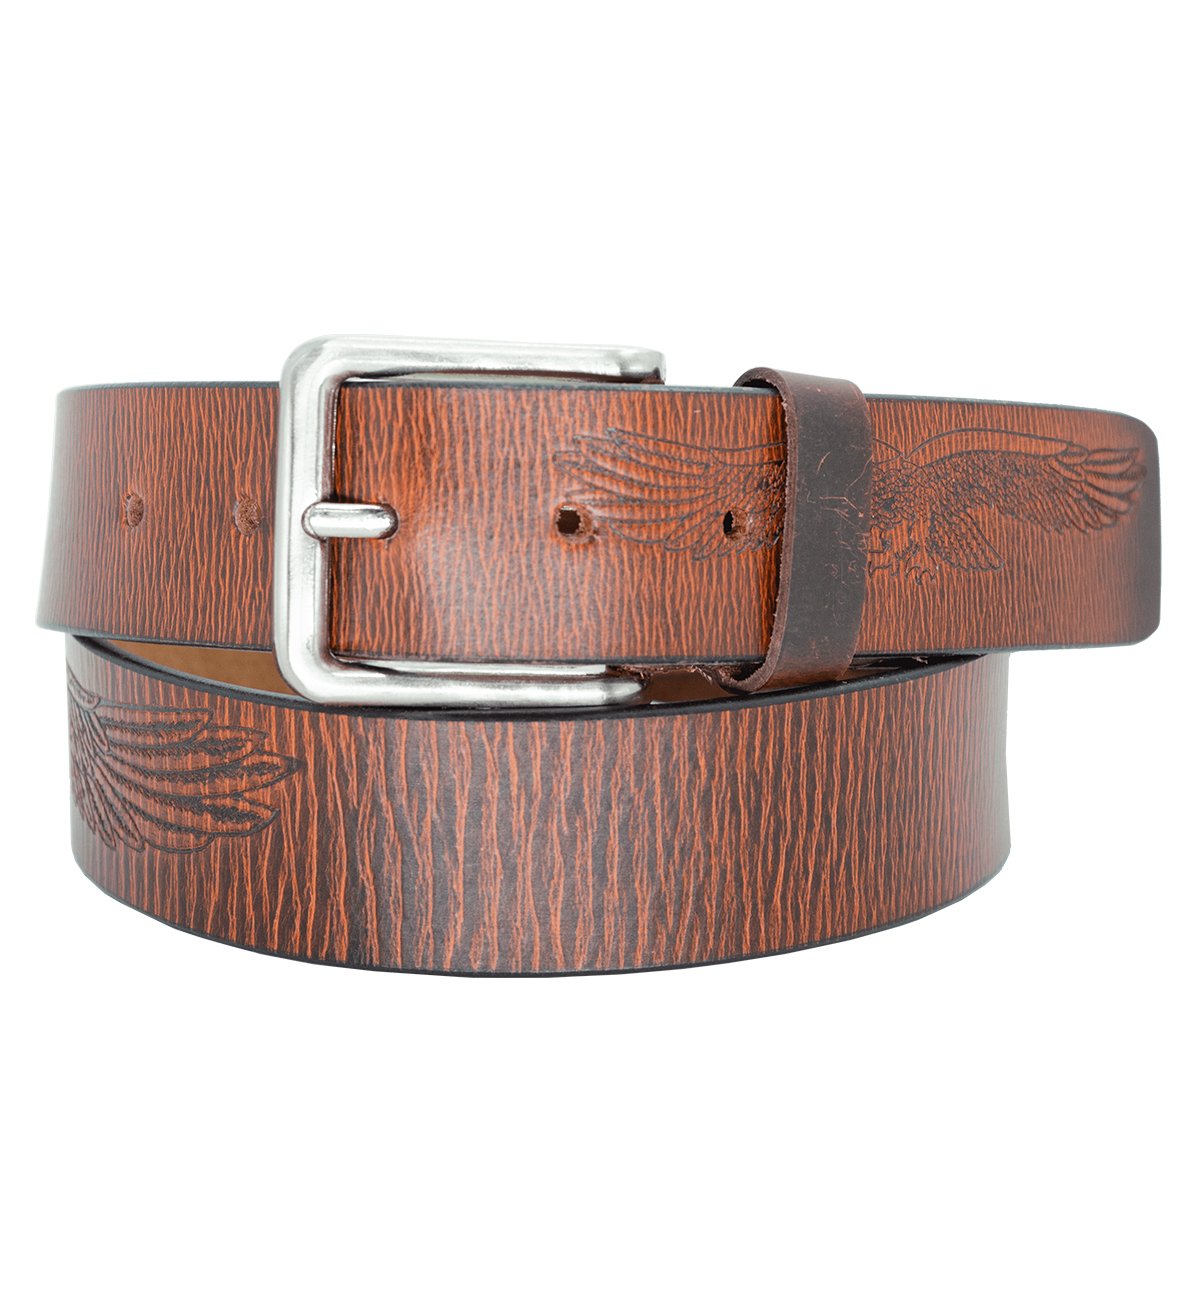 Men's Eagle Printed Genuine Leather Belt with Heavy Silver Buckle - #BT-1533